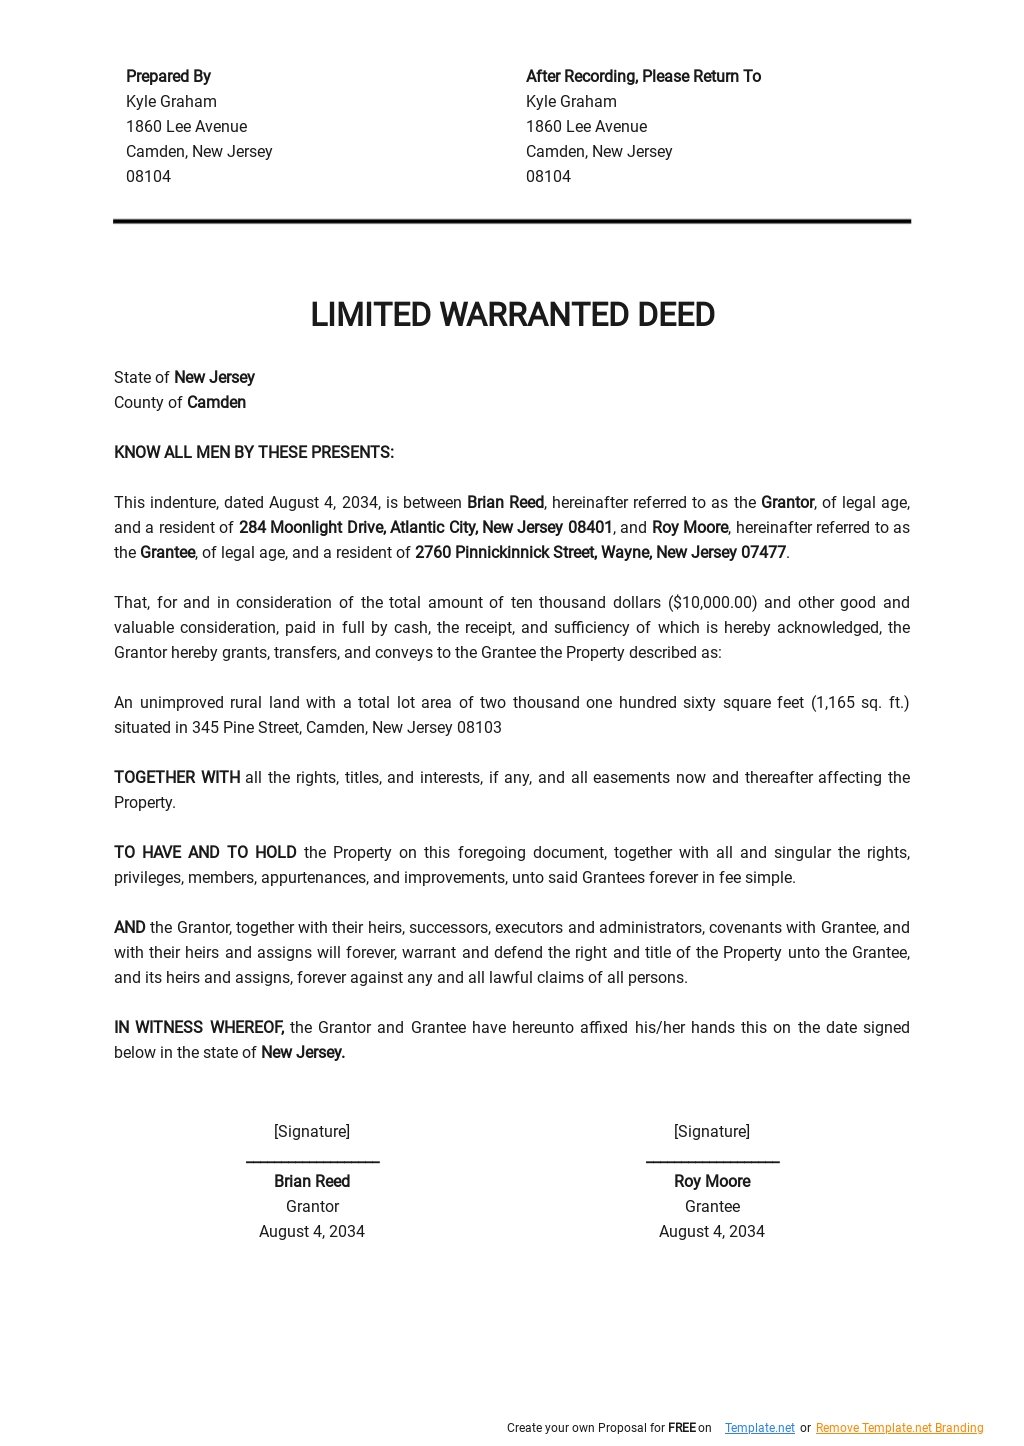 Limited Warranted Deed Template